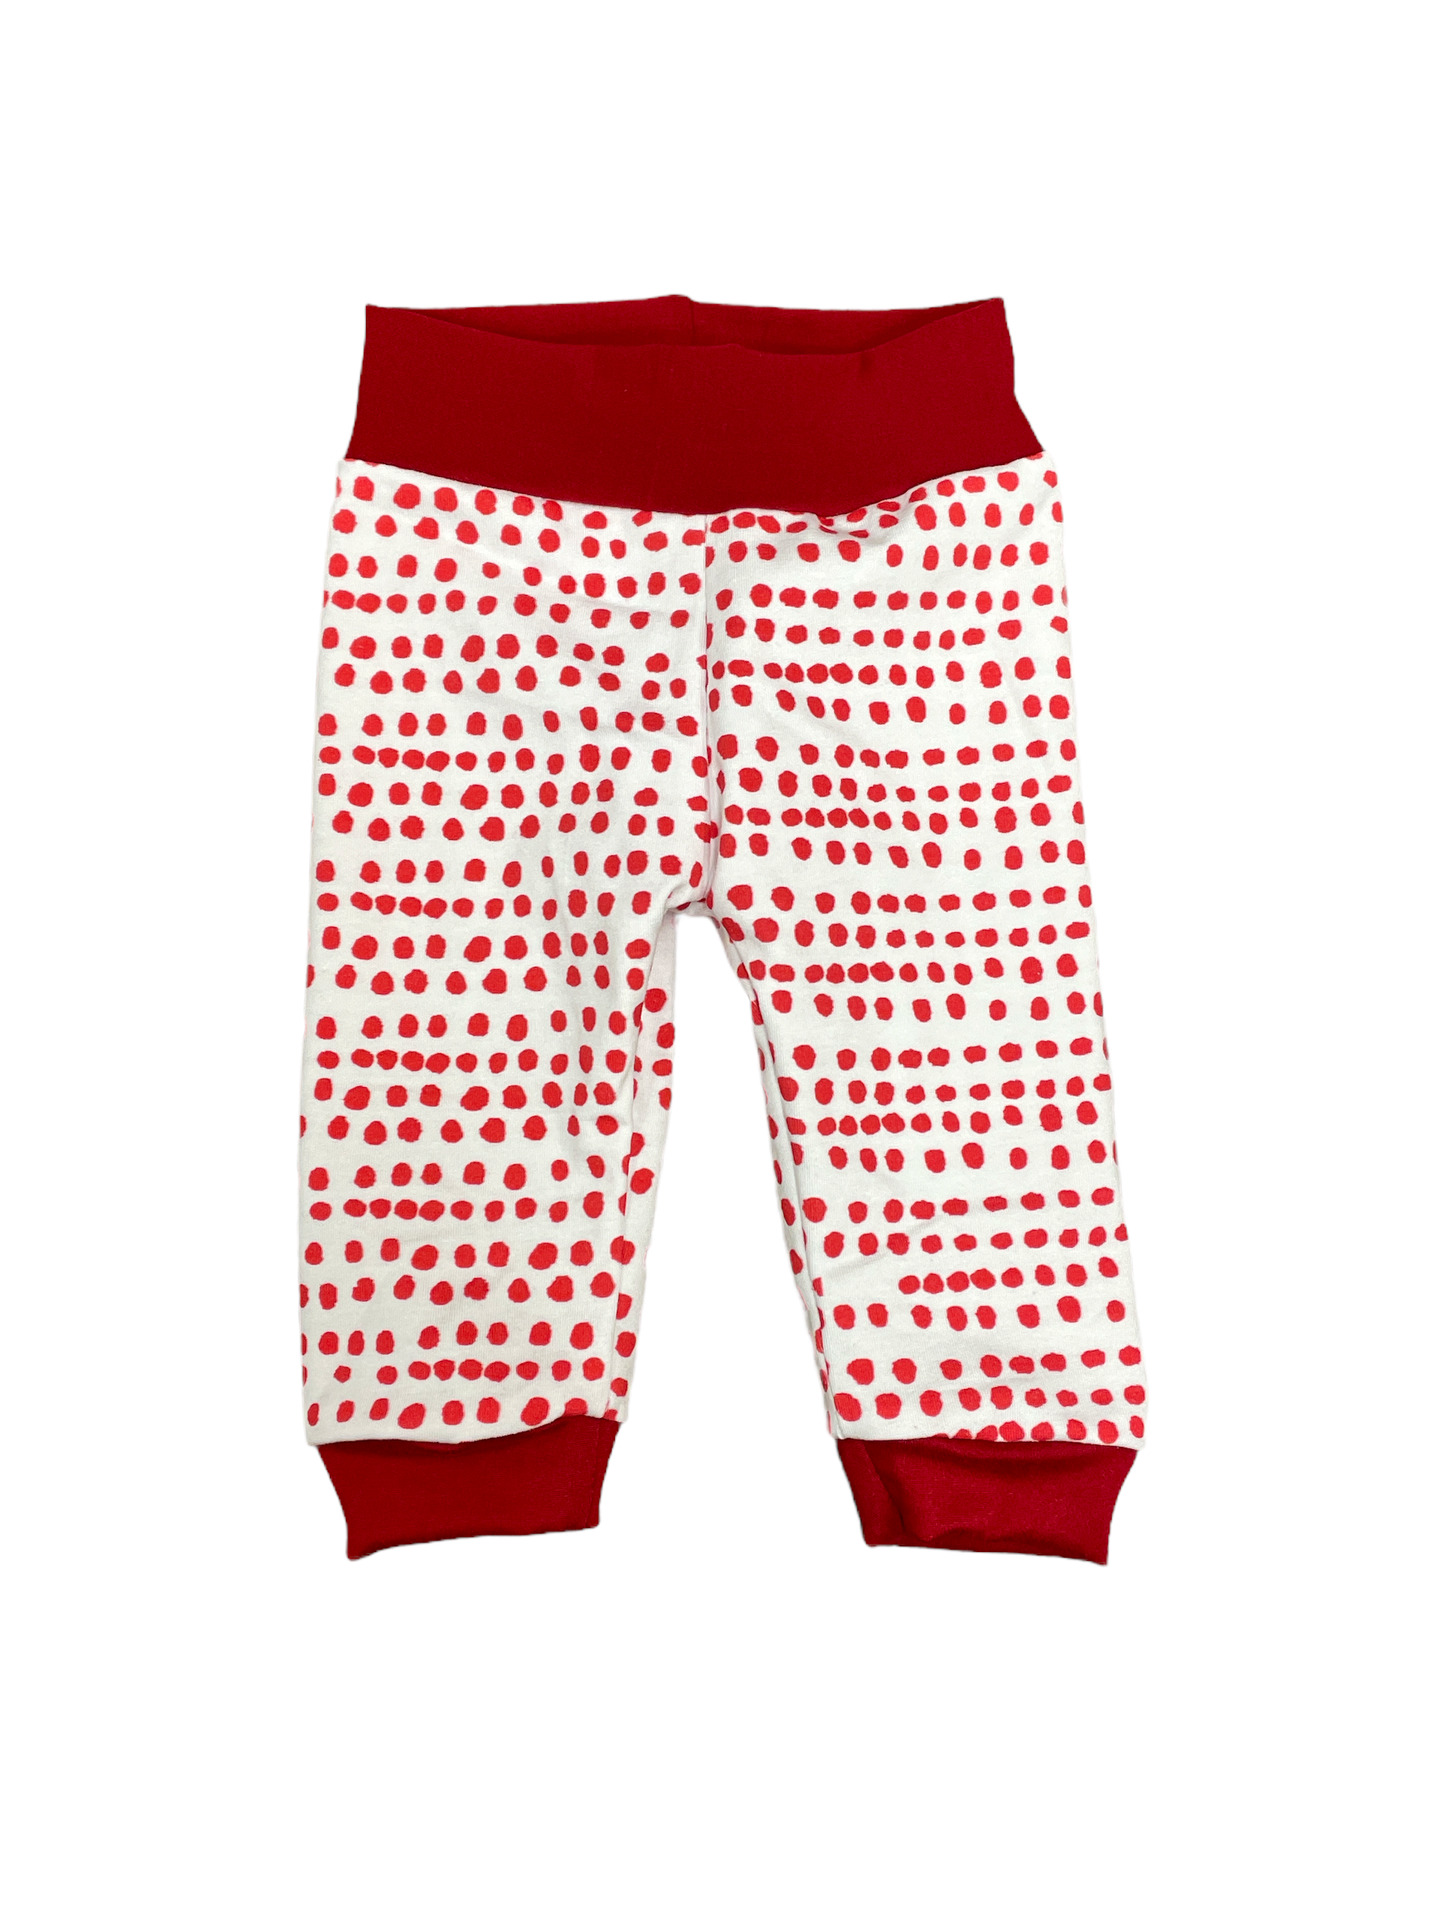 Scattered Dots • Christmas • Infant Joggers